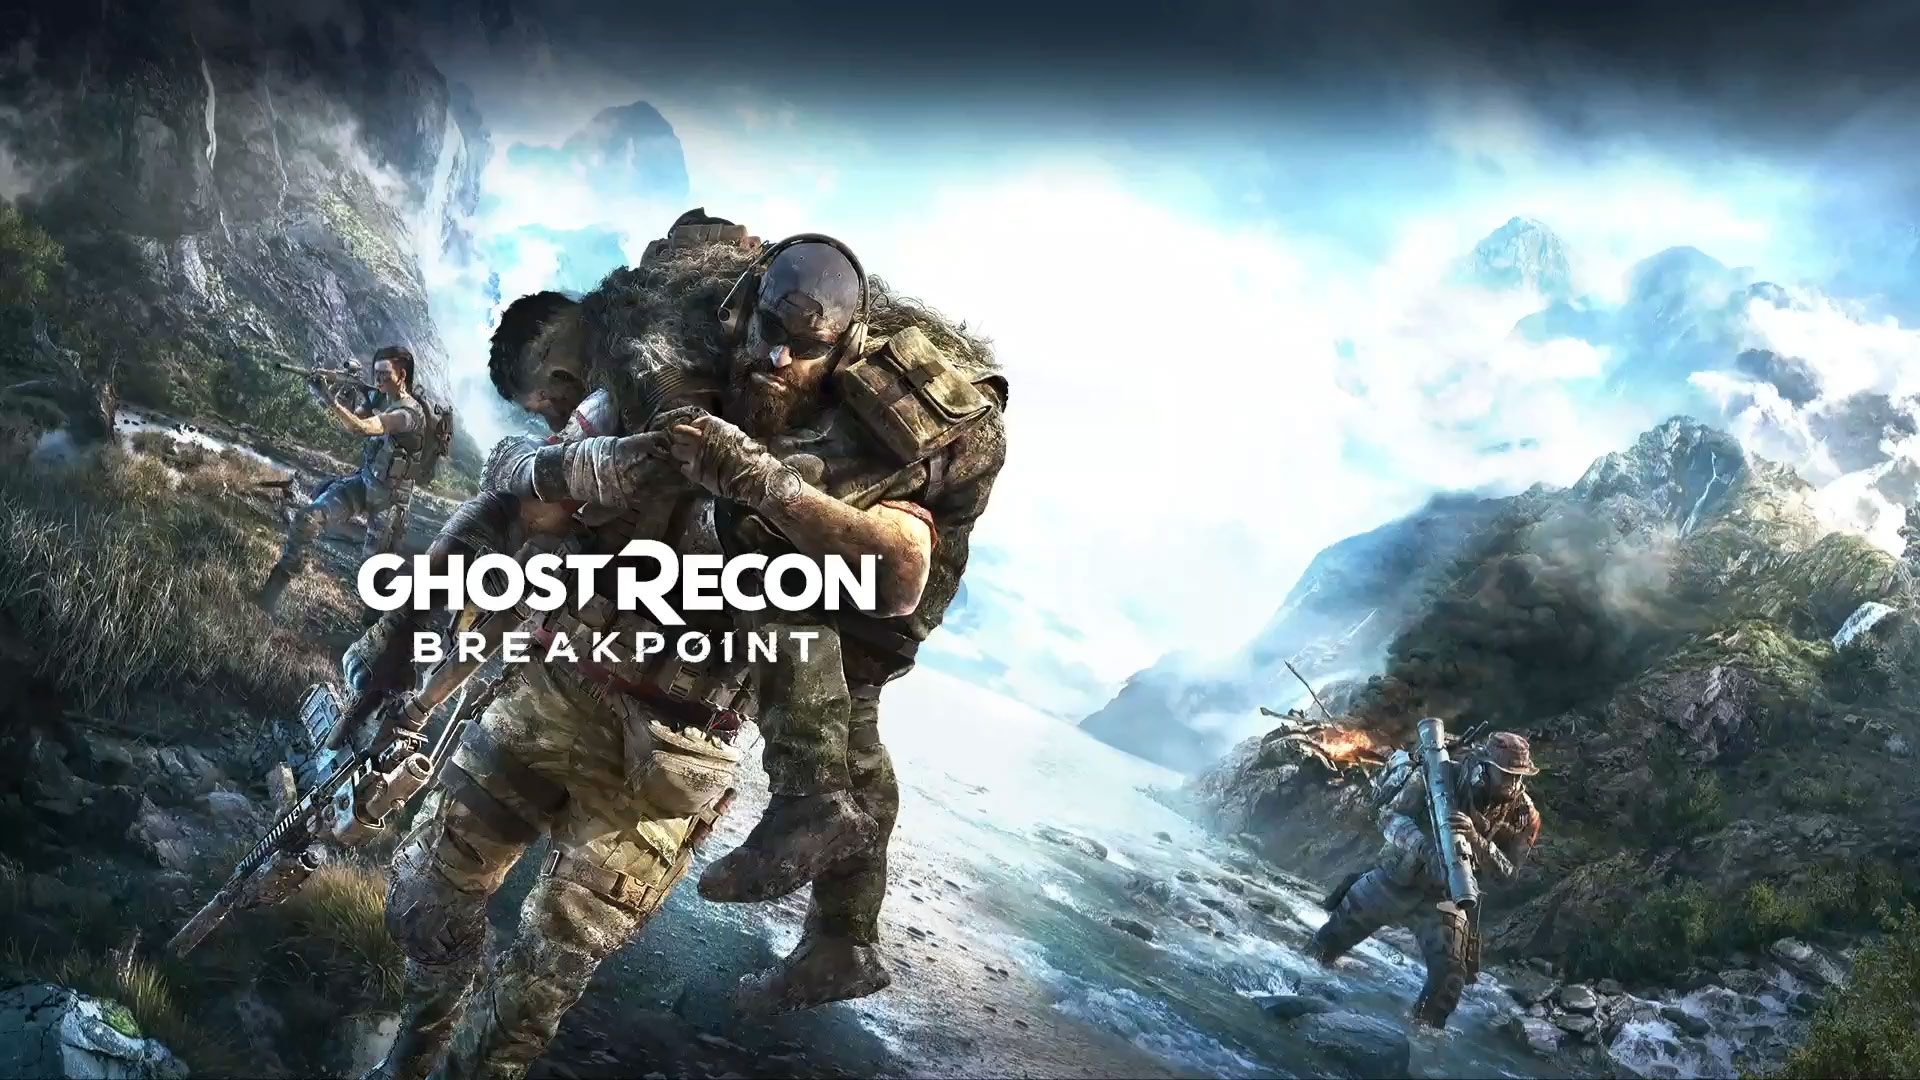 Overlord 3 1 ghost recon breakpoint. Tom Clancy's Ghost Recon: breakpoint. Ghost Recon breakpoint 2. PLAYSTATION 5 Tom Clancy s Ghost Recon. TC Ghost Recon breakpoint.